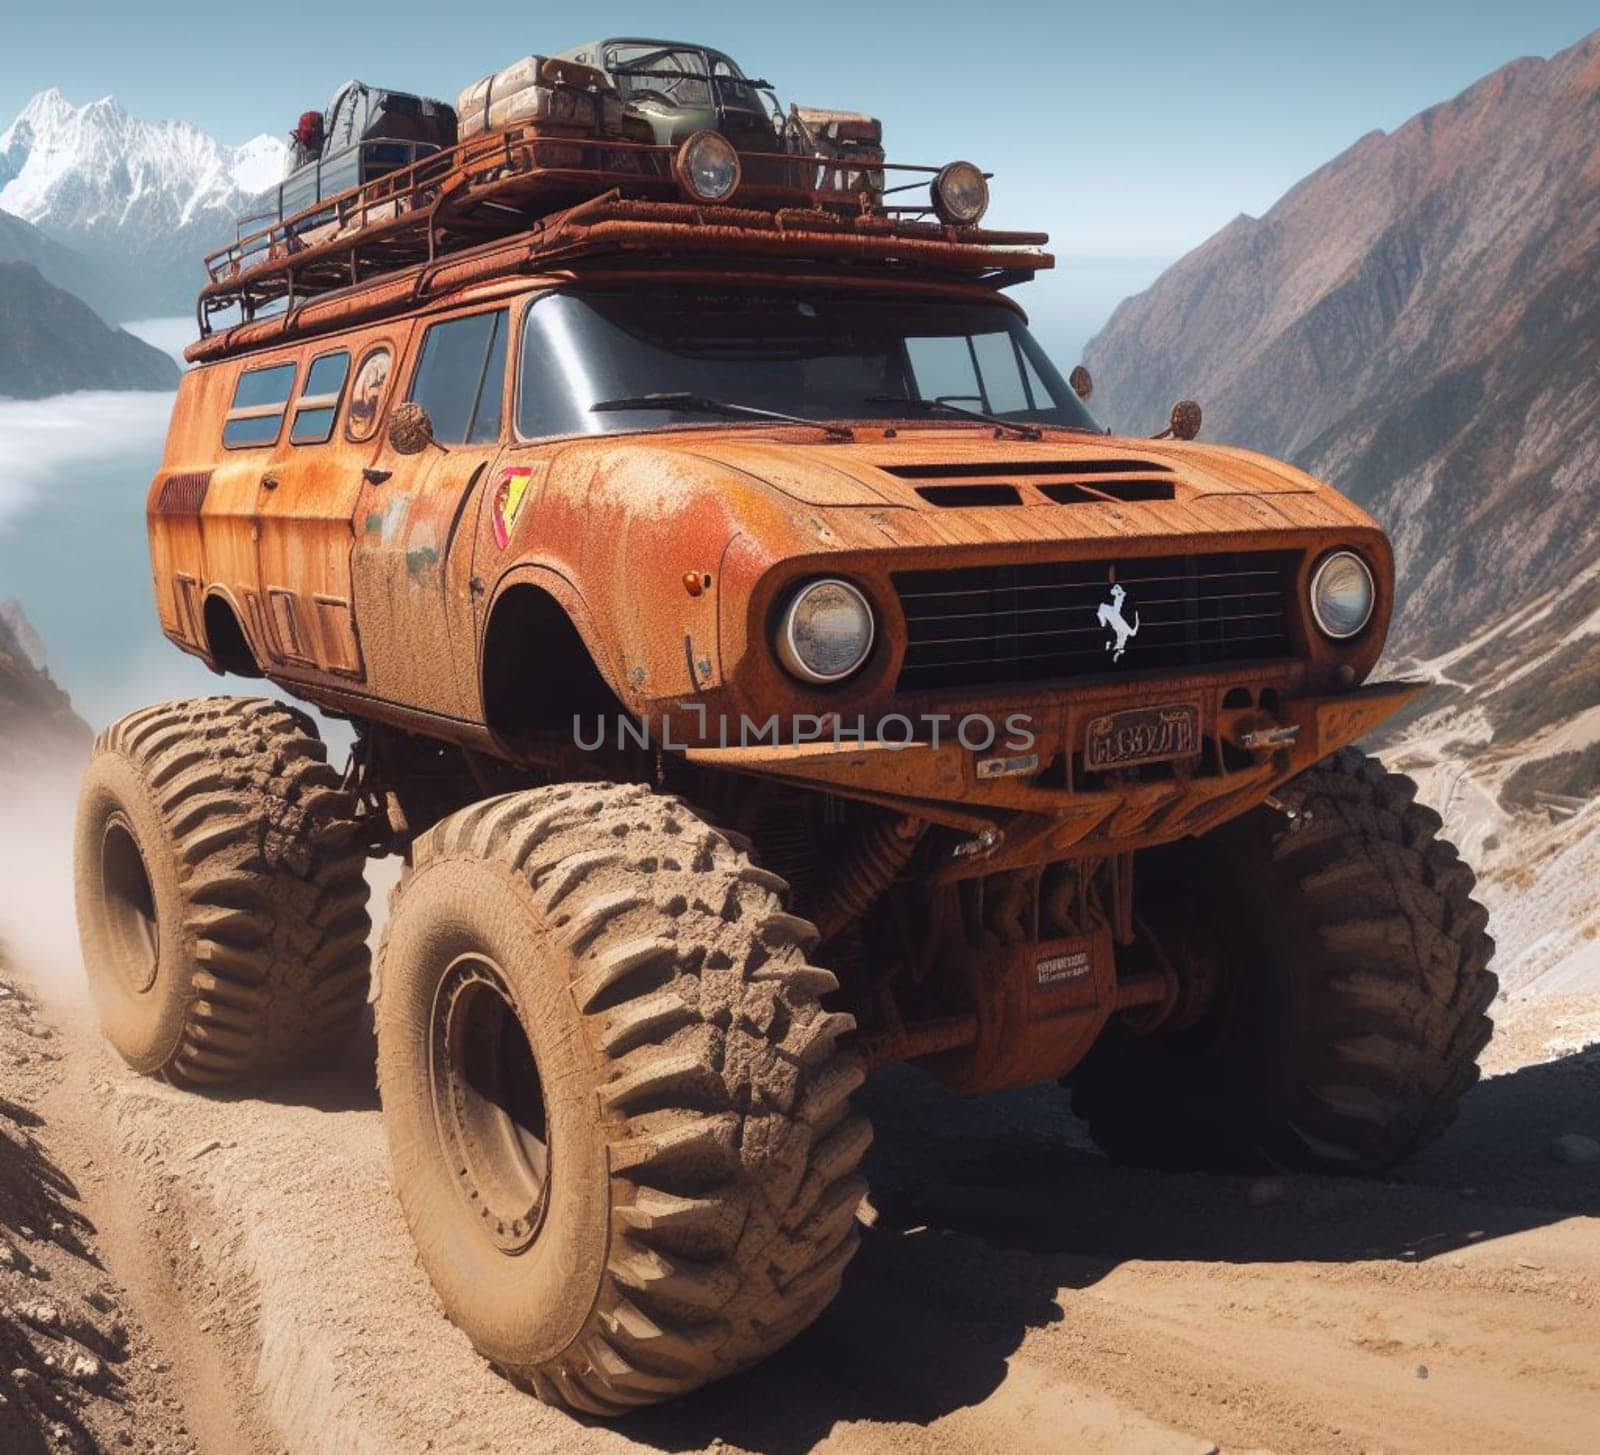 rusty dirt offroad 4x4 lifted vintage custom camper conversion jeep overlanding in mountain roads by verbano